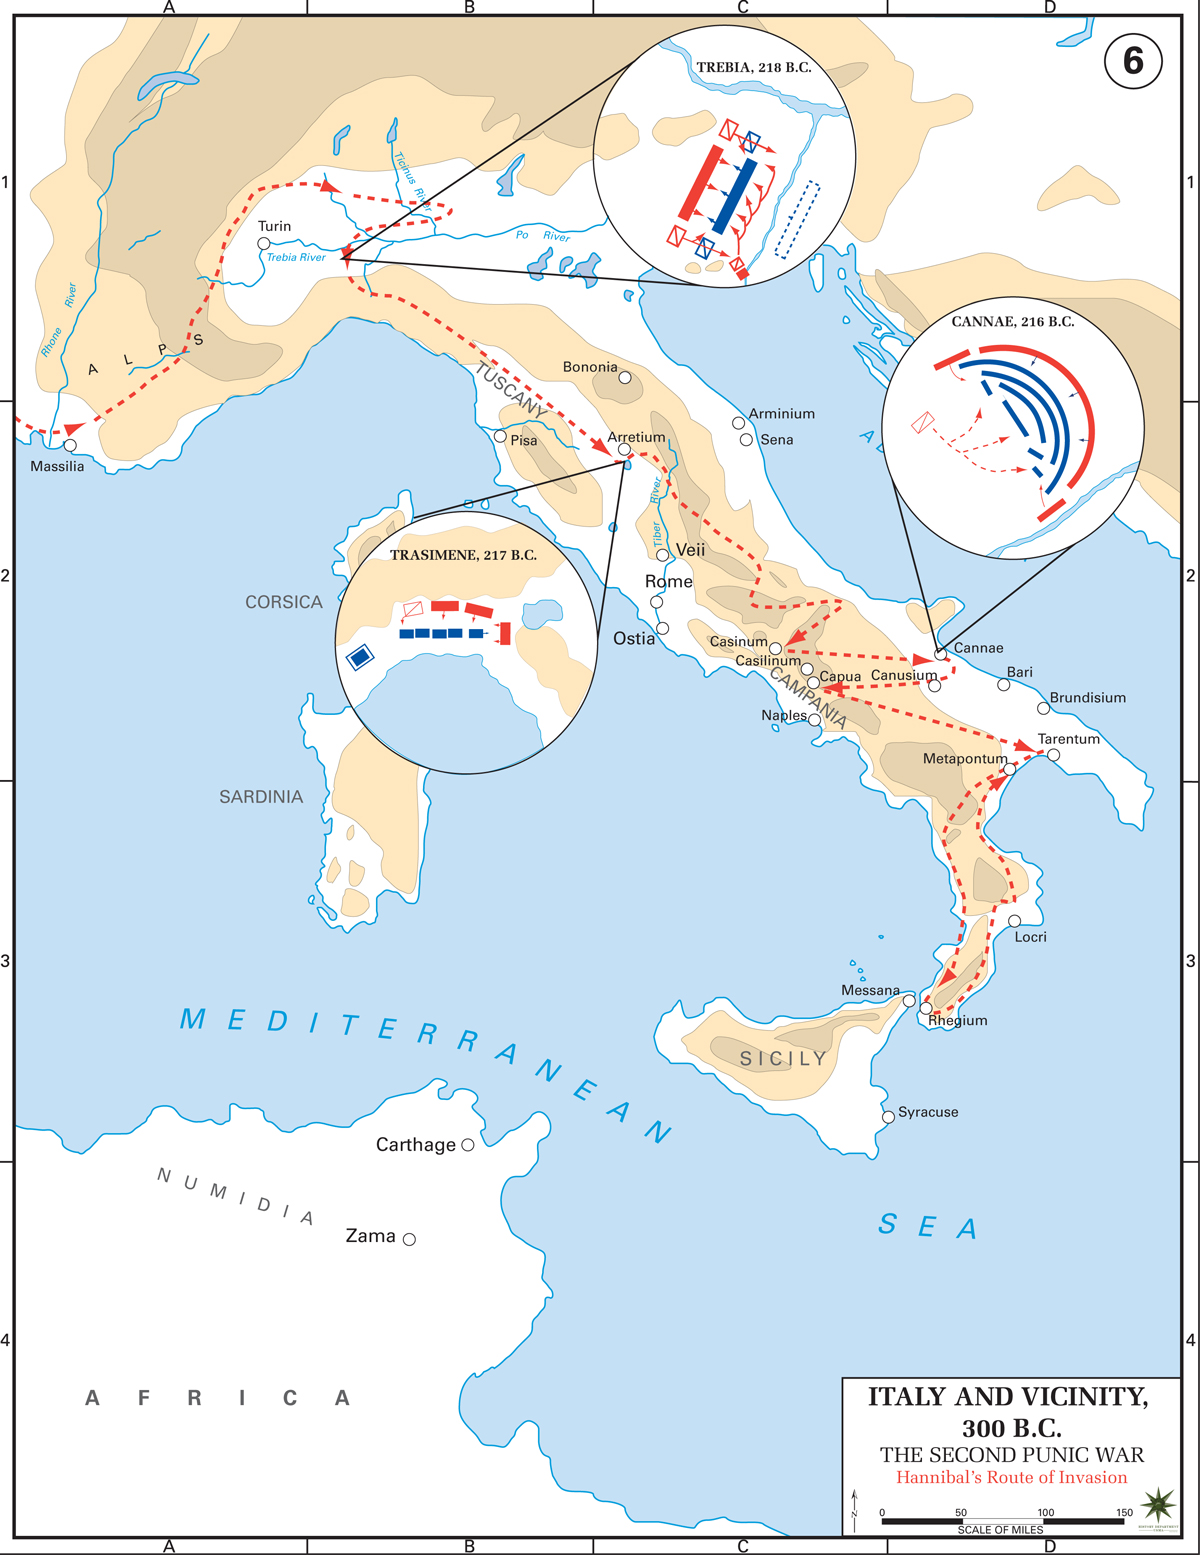 Map of Hannibal's Route of Invasion - Second Punic War 218-201 BC